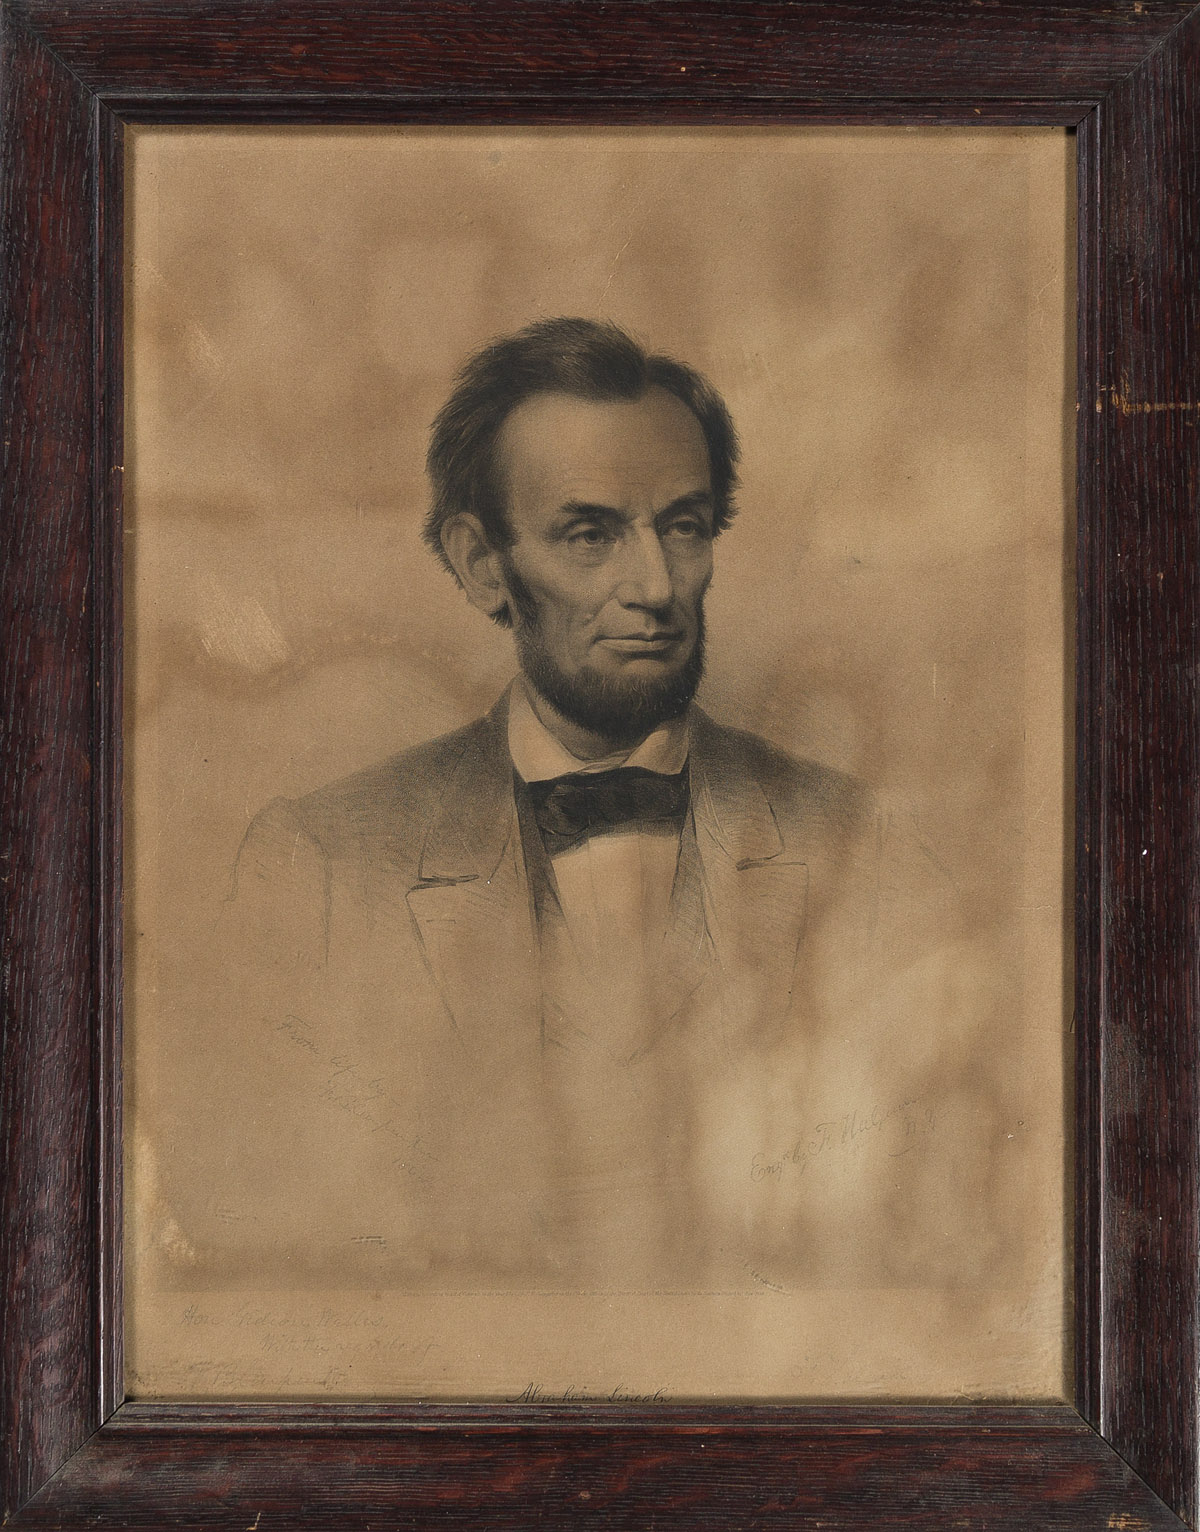 (GIDEON WELLES.) Frederick Halpin, engraver; after Carpenter. Engraved portrait of Lincoln, inscribed by the artist to Gideon Welles.